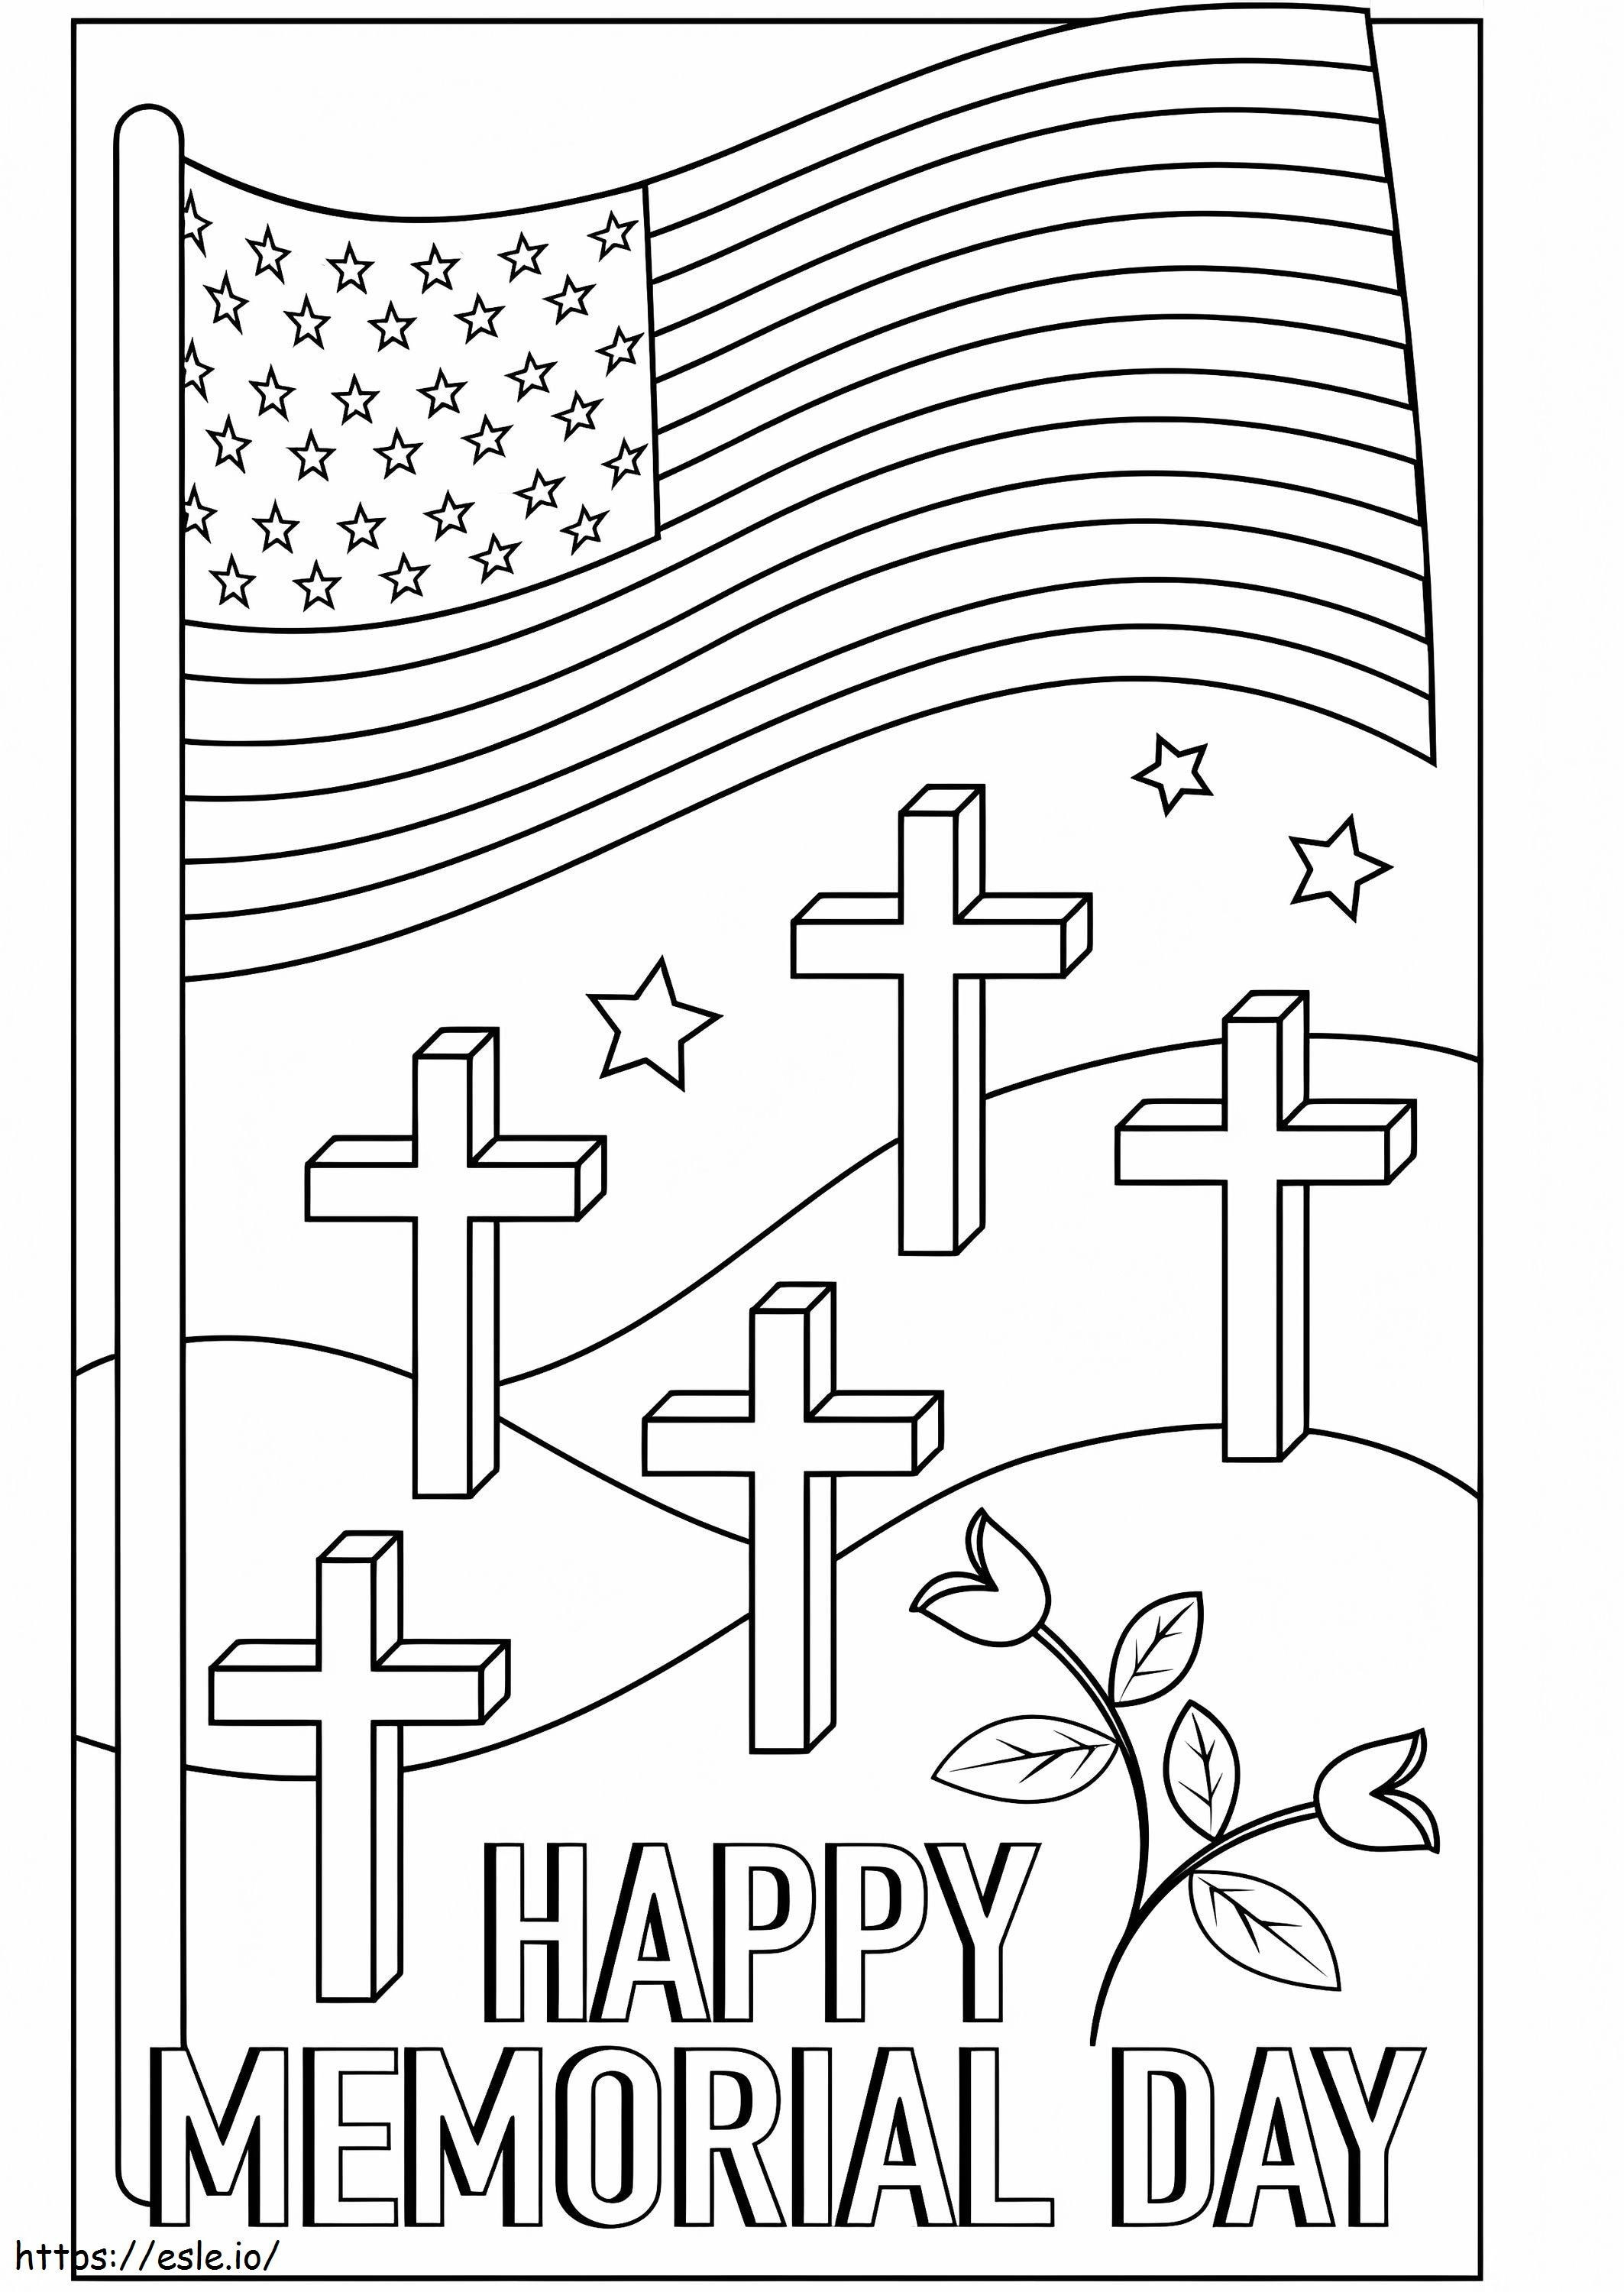 Memorial Day 4 coloring page